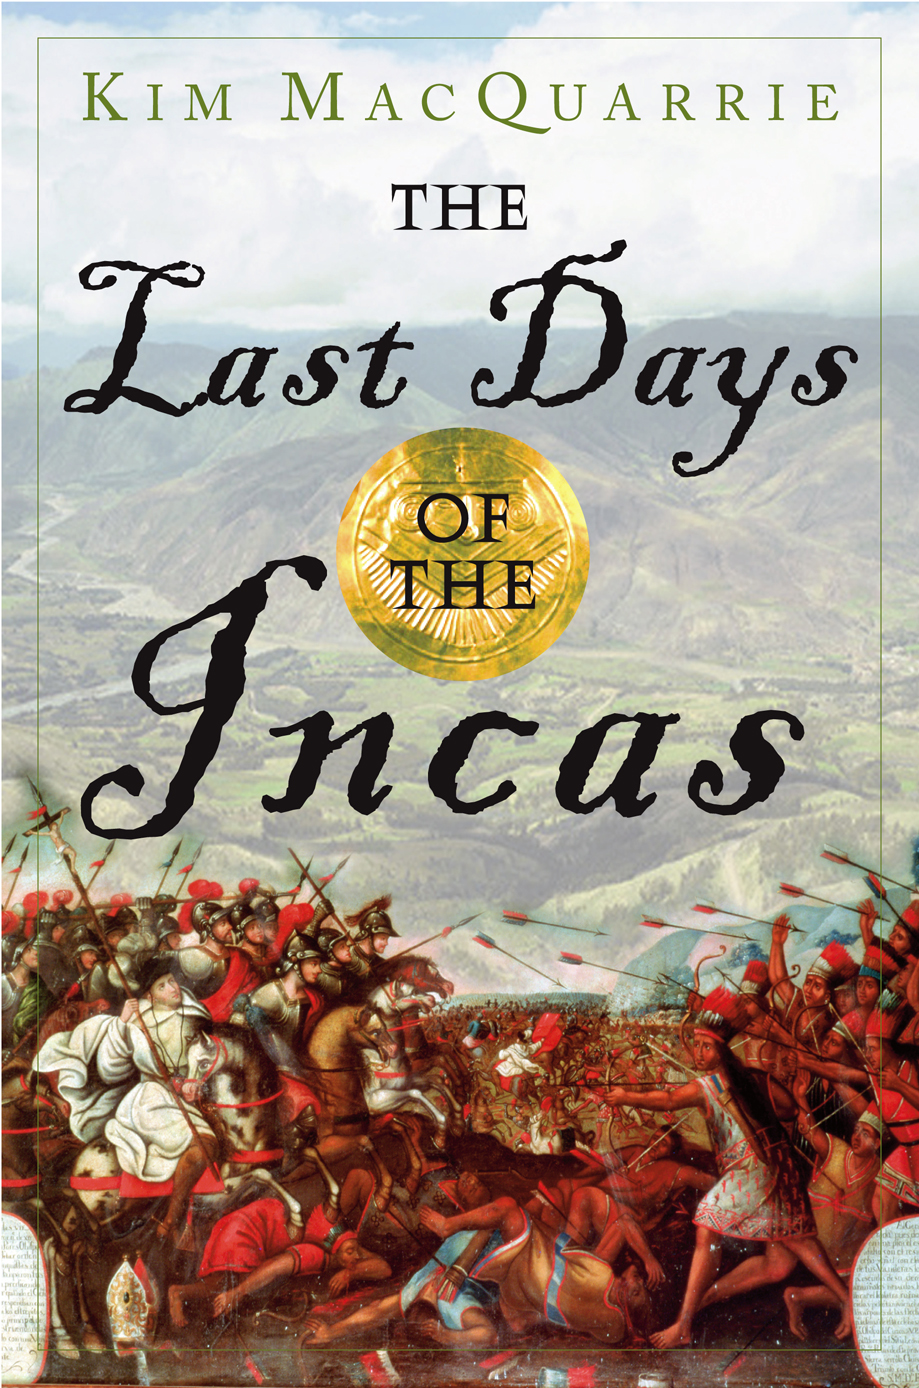 the last days of the incas book review